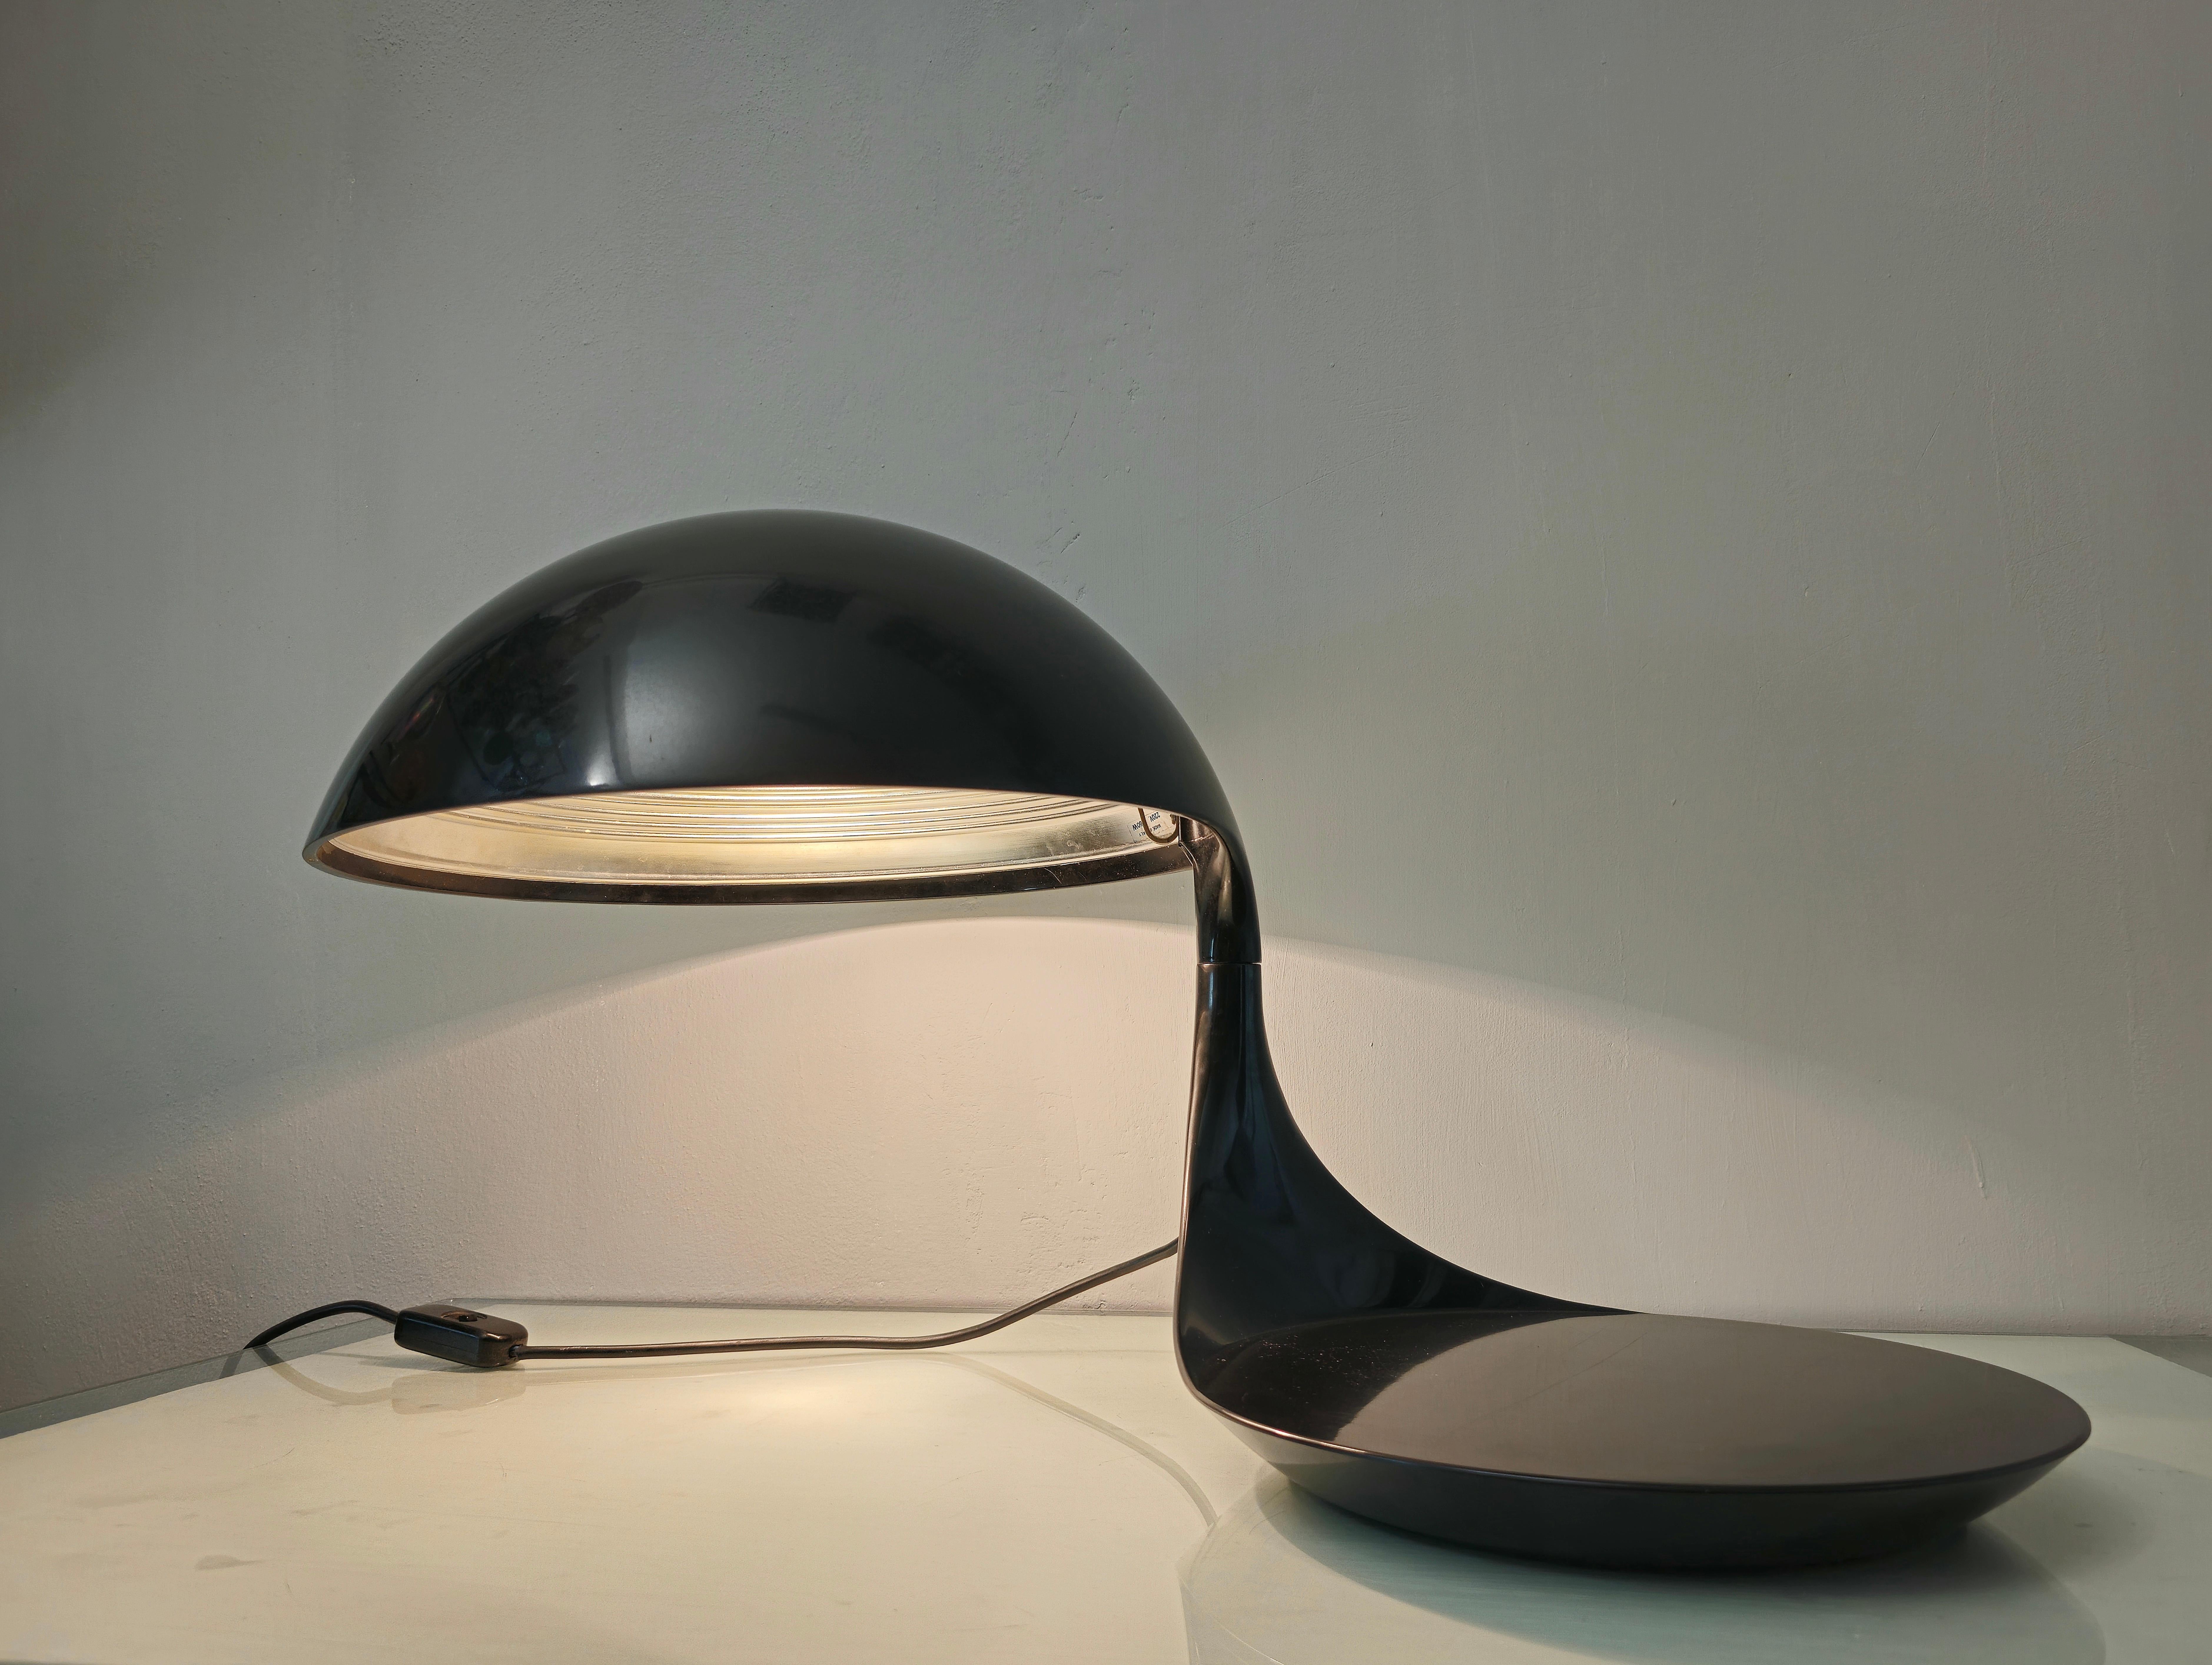 Cobra 629 model table or desk lamp designed by Elio Martinelli and produced in the 60s/70s by Martinelli luce.
The lamp was made of resin in the shade of black, the upper part of the lamp has a 360° rotation, giving the possibility of adjusting the